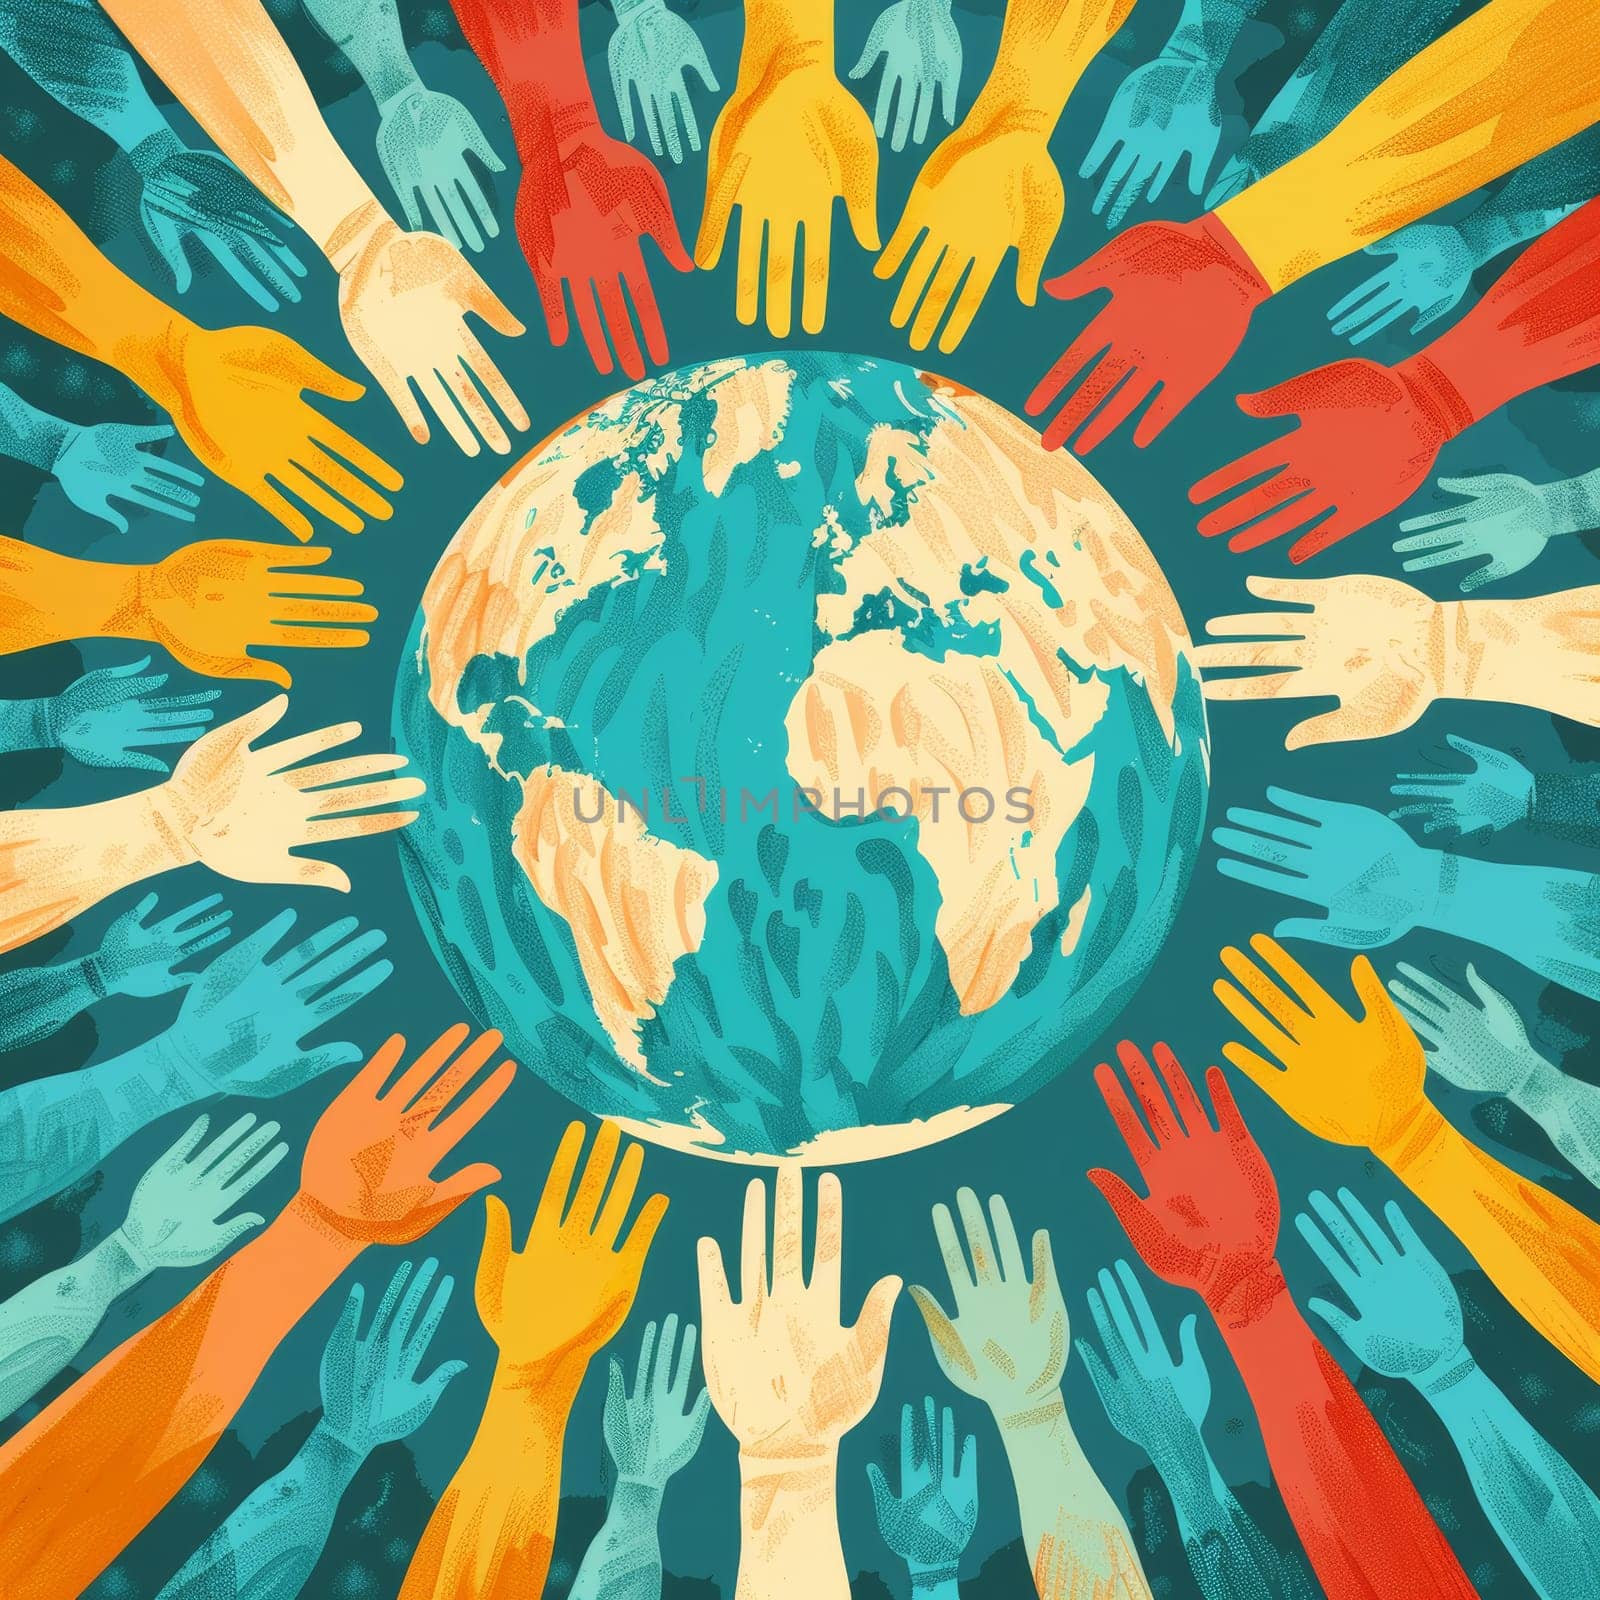 Diverse Hands Reaching for Earth. Global Unity and Environmental Protection